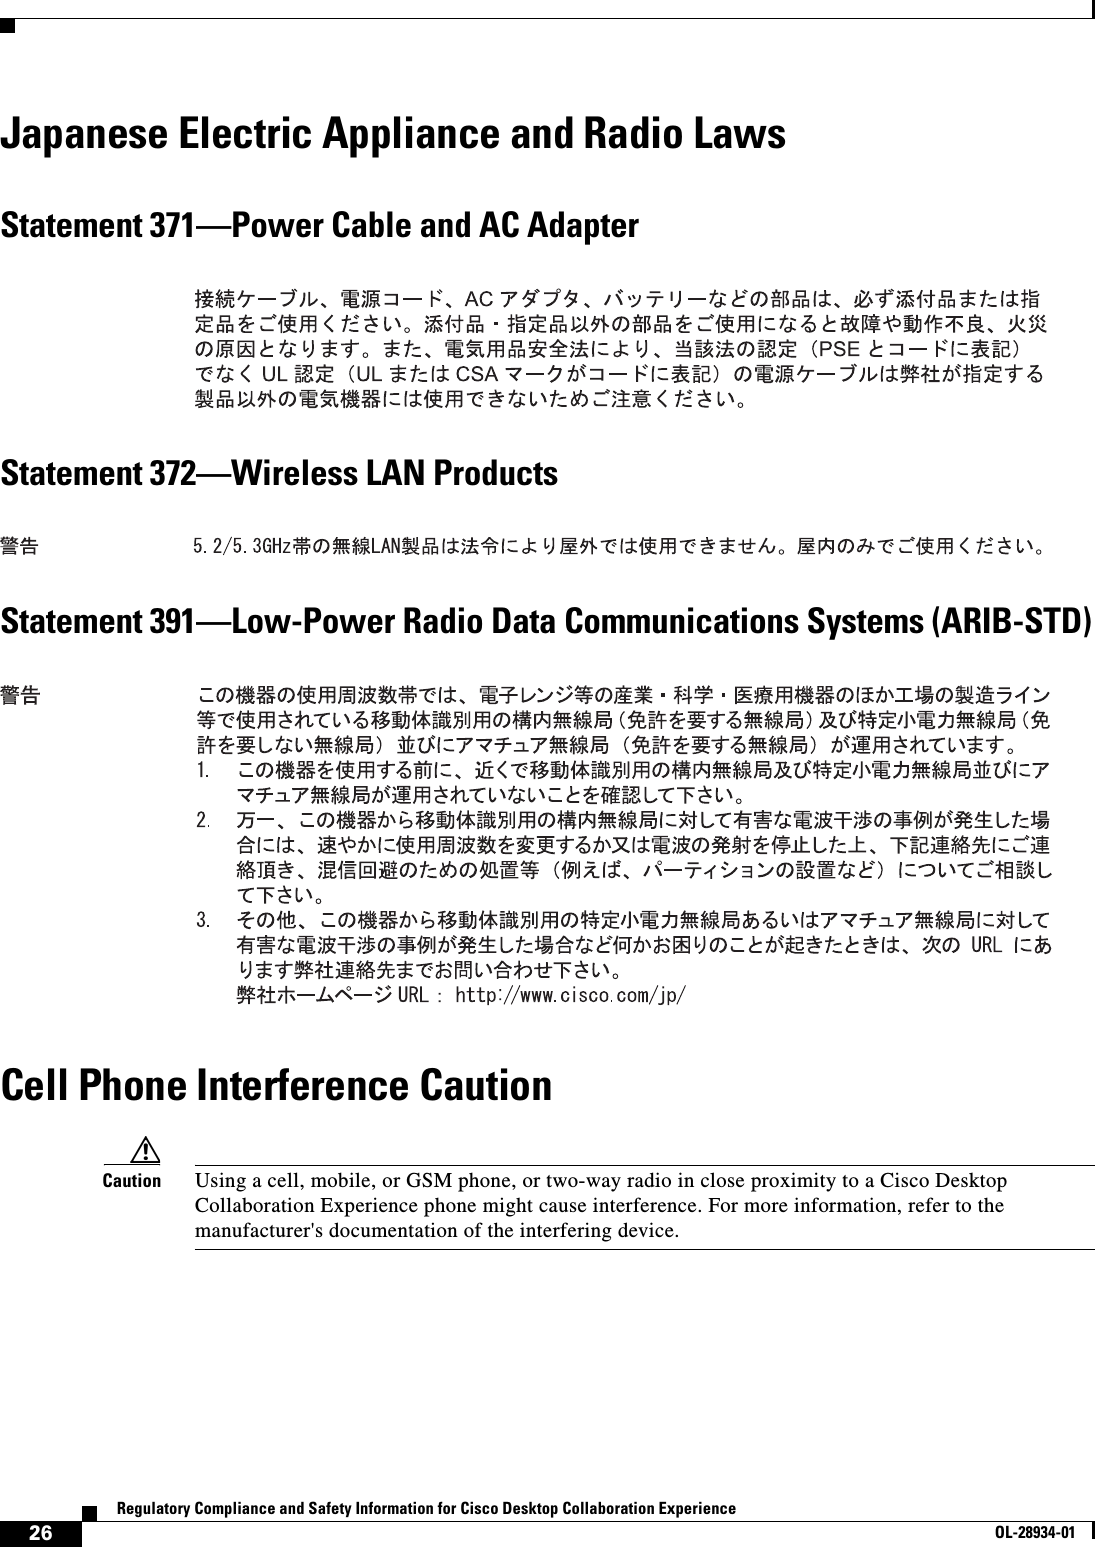  26Regulatory Compliance and Safety Information for Cisco Desktop Collaboration ExperienceOL-28934-01Japanese Electric Appliance and Radio LawsStatement 371—Power Cable and AC AdapterStatement 372—Wireless LAN ProductsStatement 391—Low-Power Radio Data Communications Systems (ARIB-STD)Cell Phone Interference CautionCaution Using a cell, mobile, or GSM phone, or two-way radio in close proximity to a Cisco Desktop Collaboration Experience phone might cause interference. For more information, refer to the manufacturer&apos;s documentation of the interfering device.